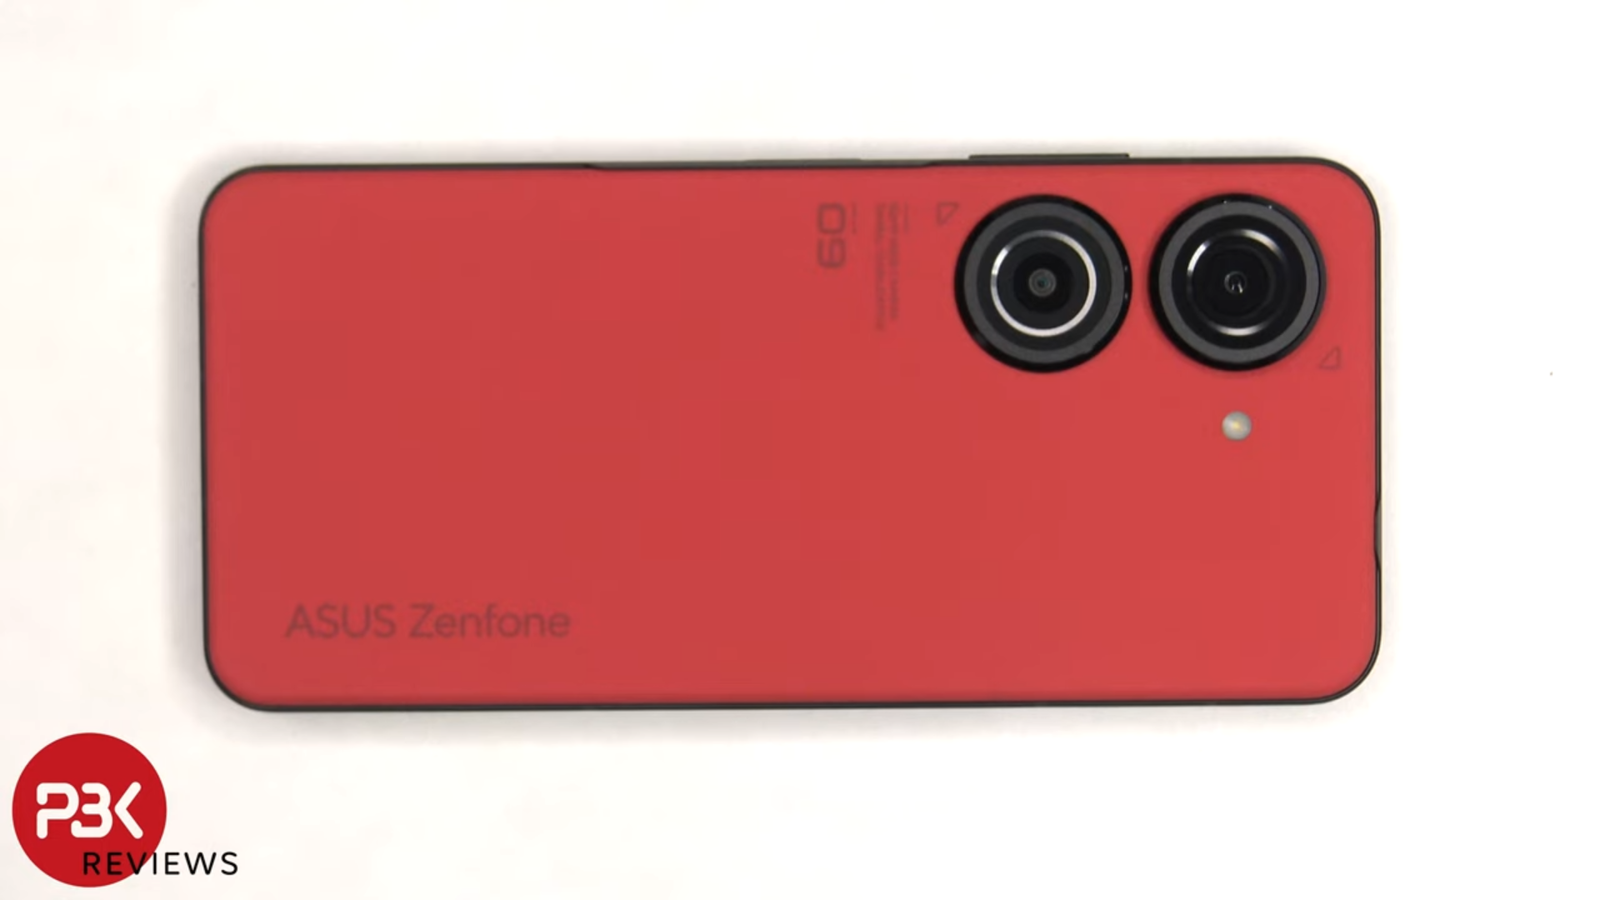 Asus Zenfone 9 repairability is build to the sign in a fresh teardown video